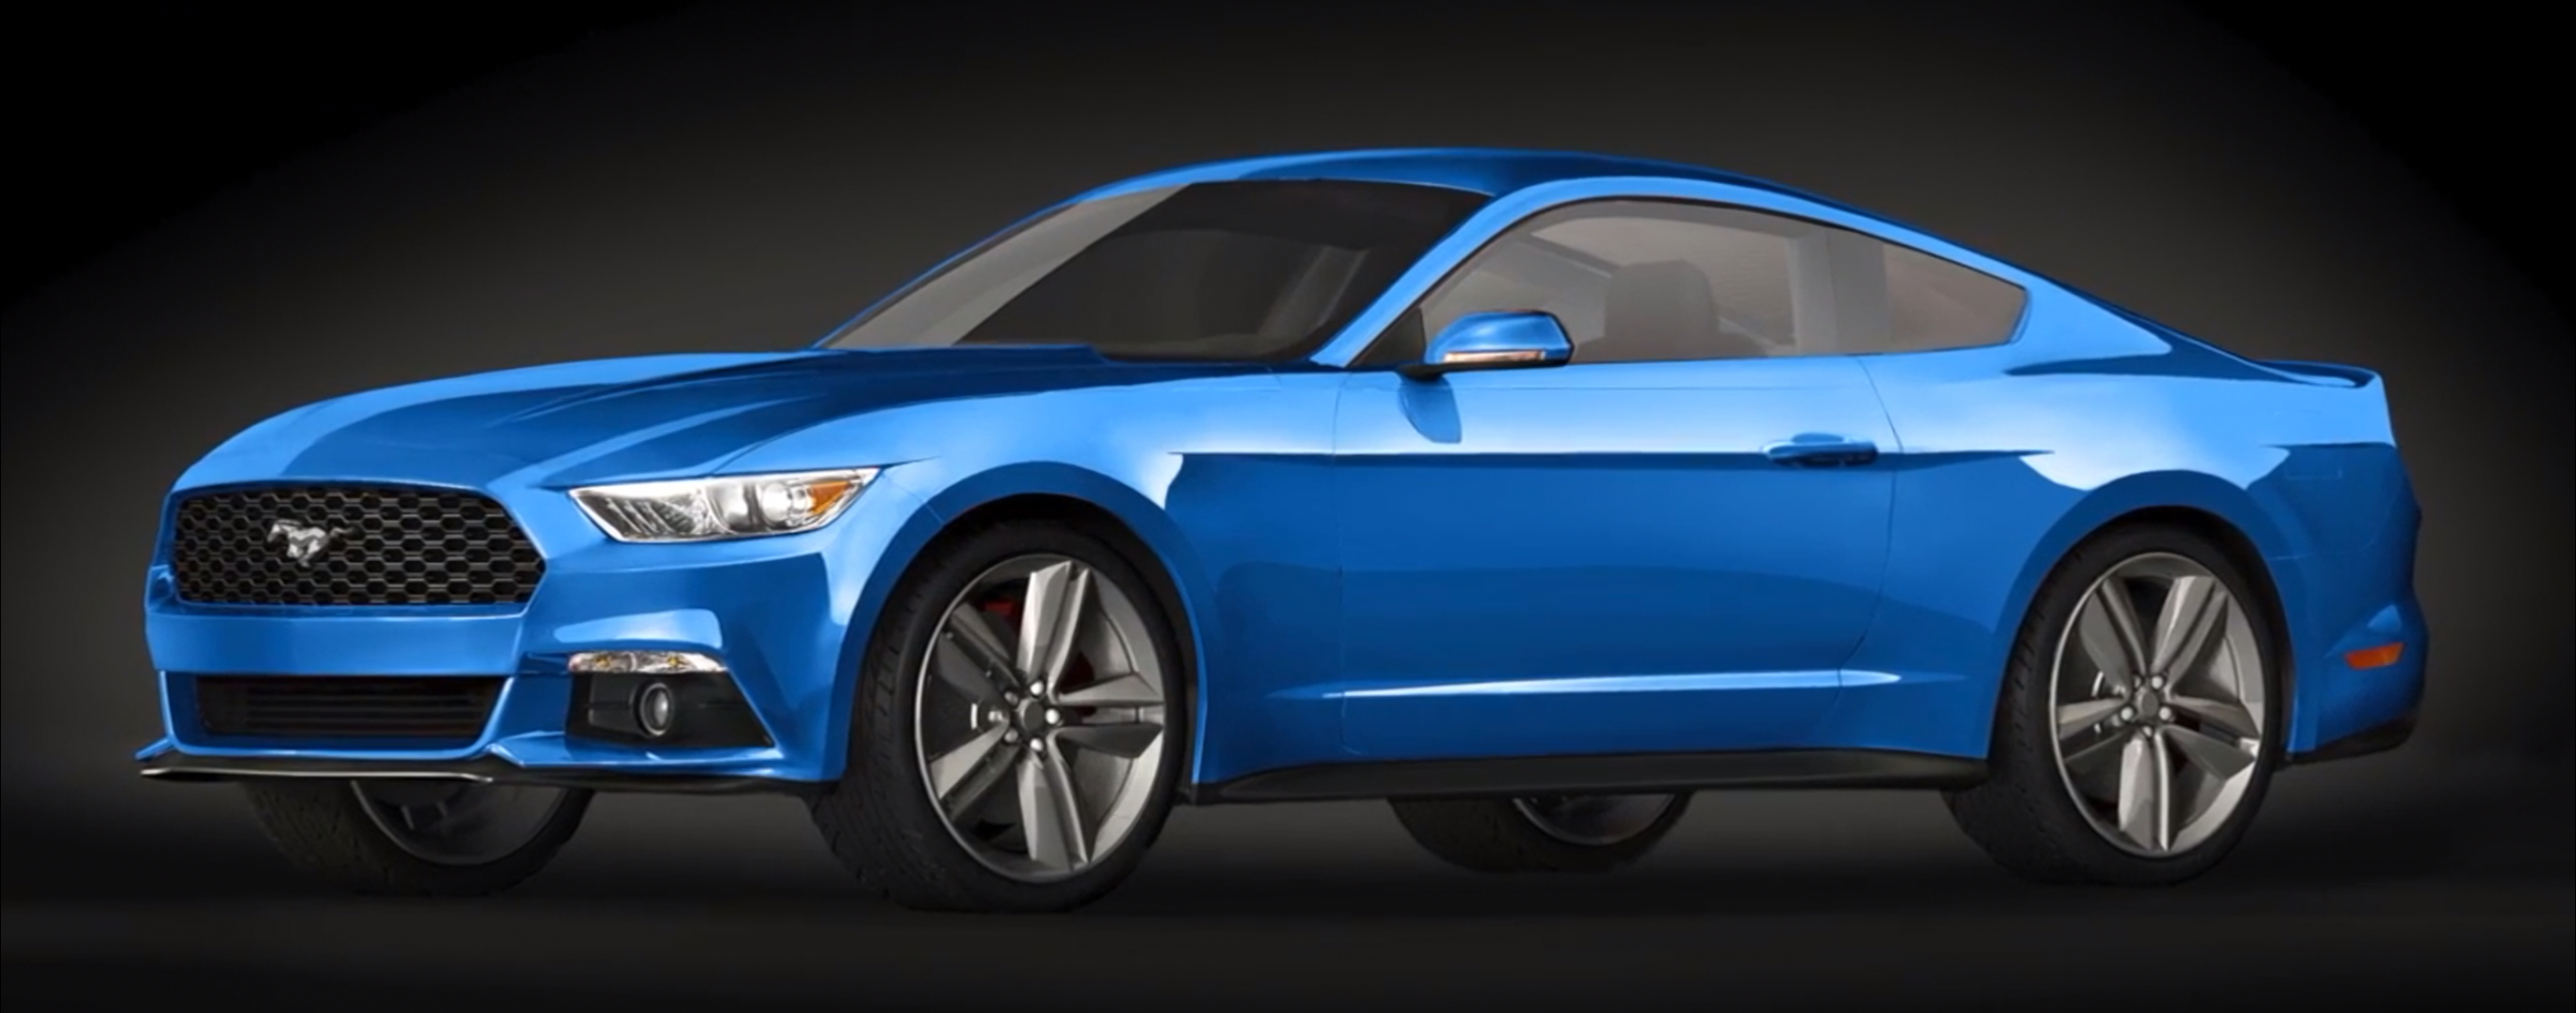 S650 Mustang chazcron weighs in... 7th gen 2023 Mustang S650 3D model & renderings in several colors! 1660108050290